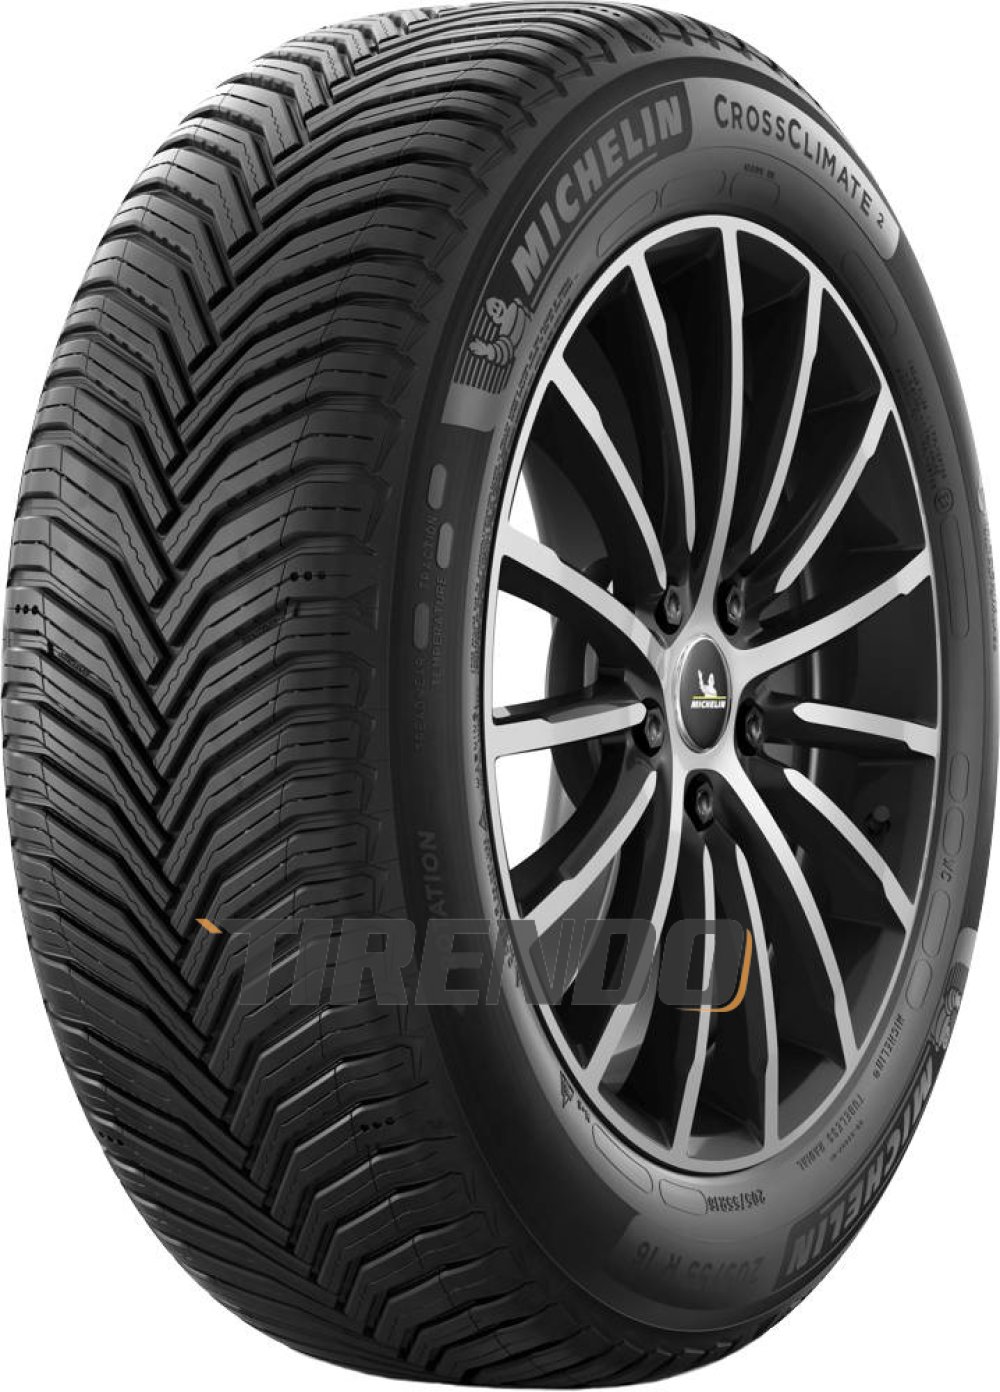 Image of Michelin CrossClimate 2 ( 205/55 R17 95V XL )